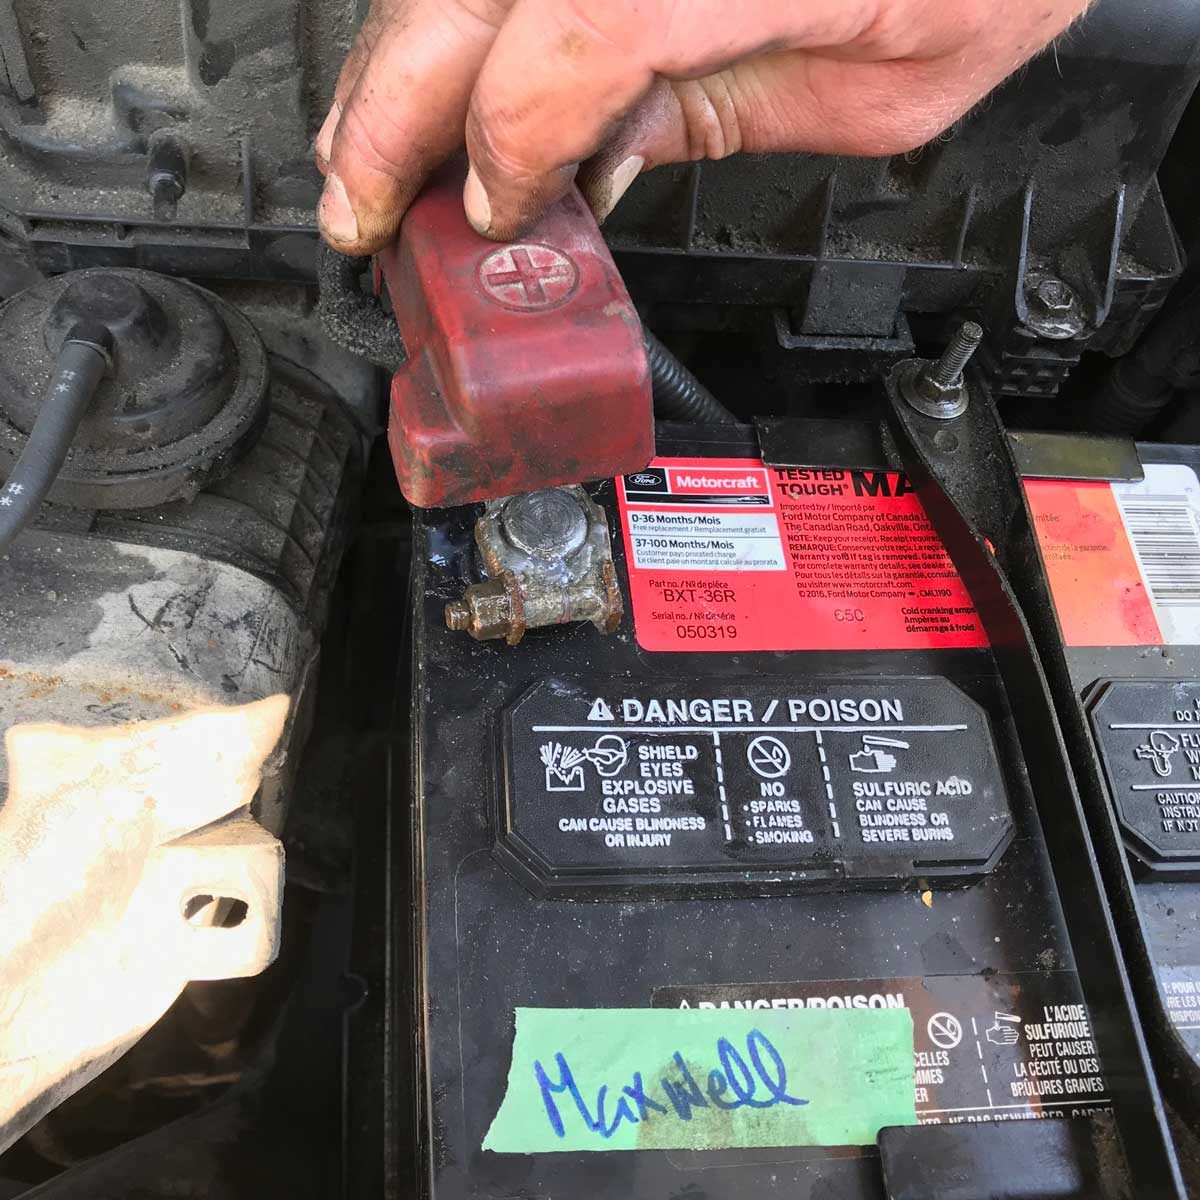 How to Disconnect Car Battery? A Guide to Disconnecting Your